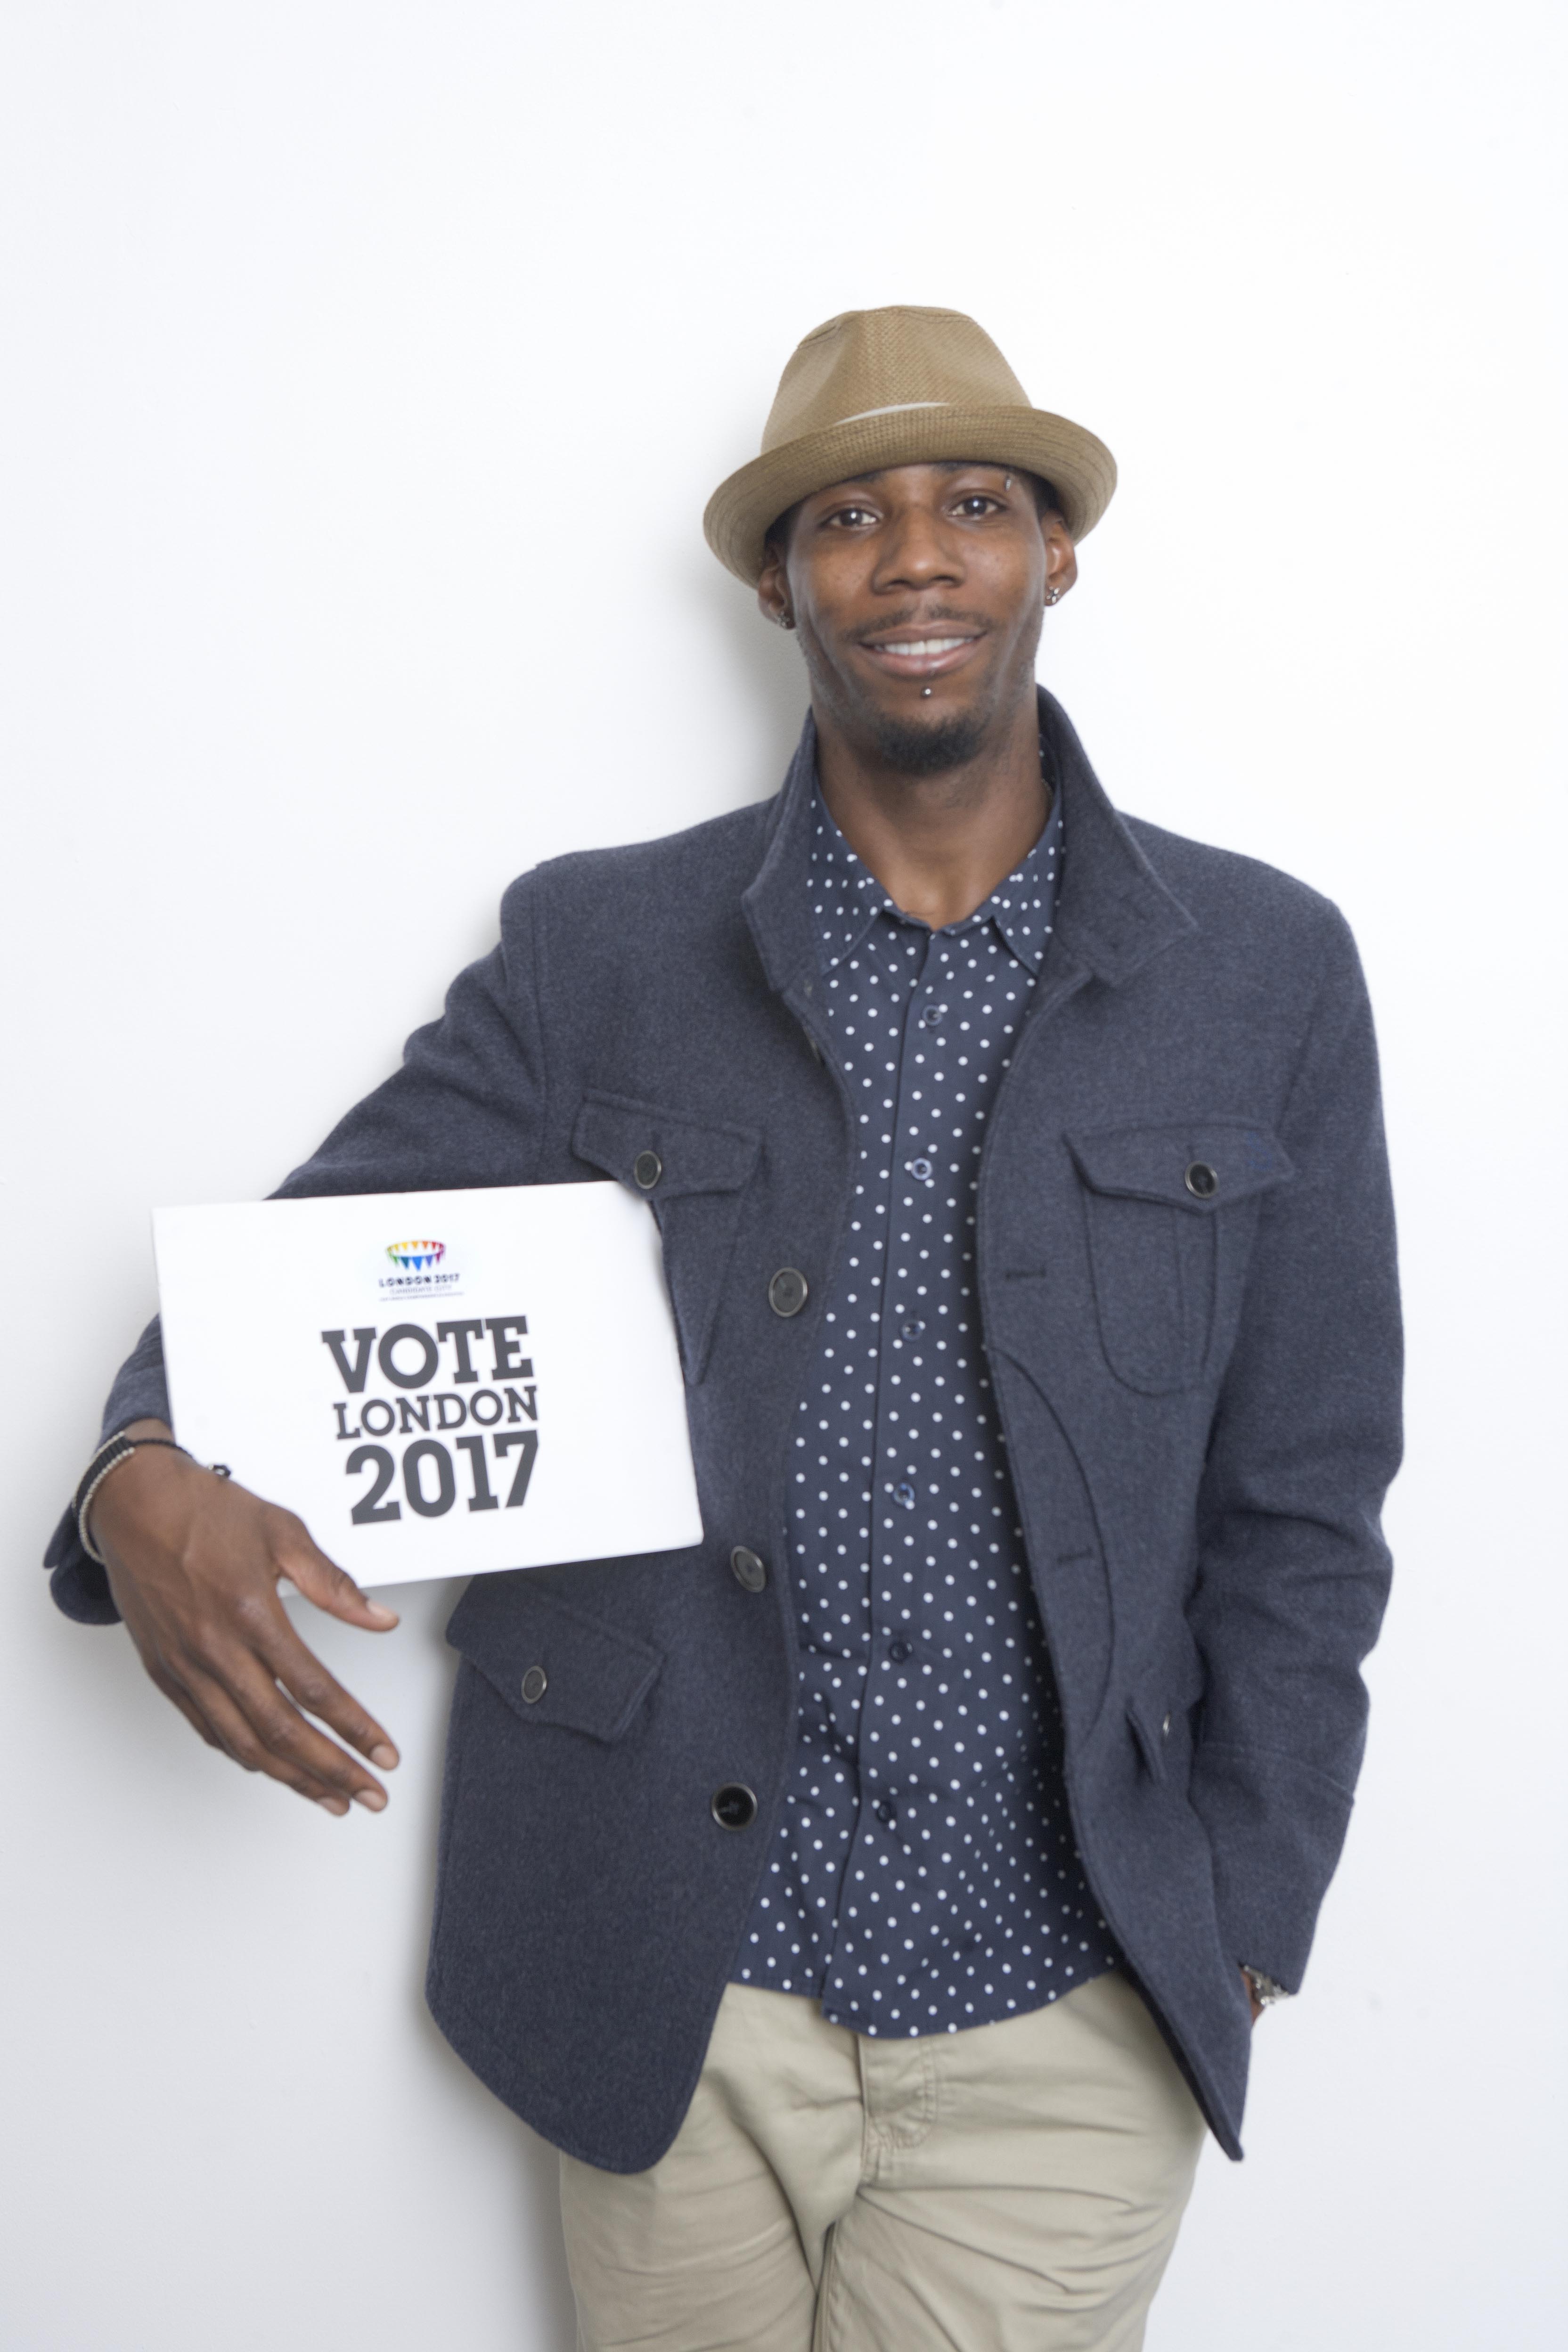 Phillips_Idowu_with_vote_for_London_2017_sign